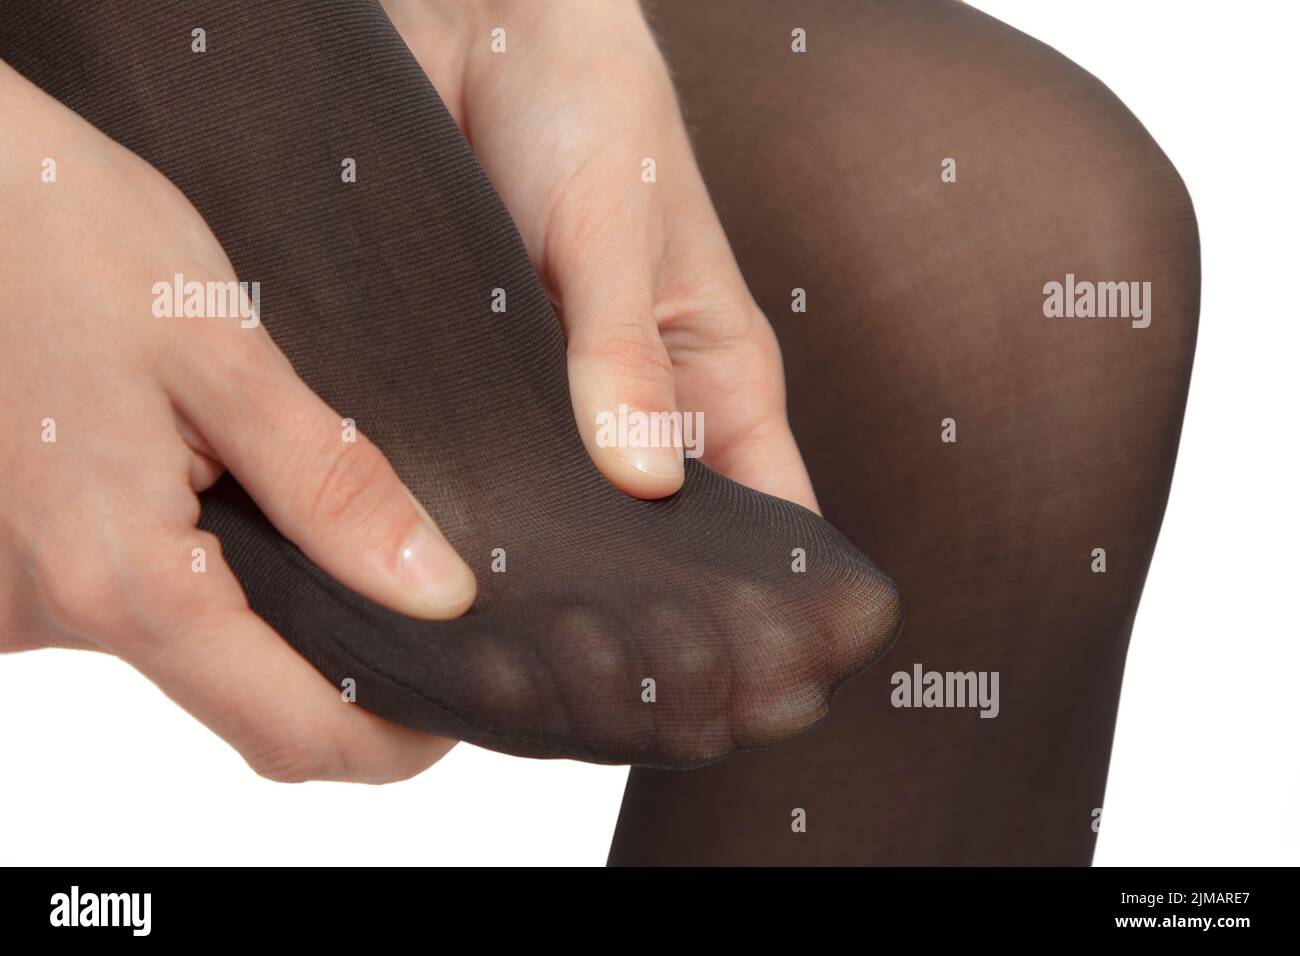 Toes Pain Rubbing Pantyhose Stock Photo